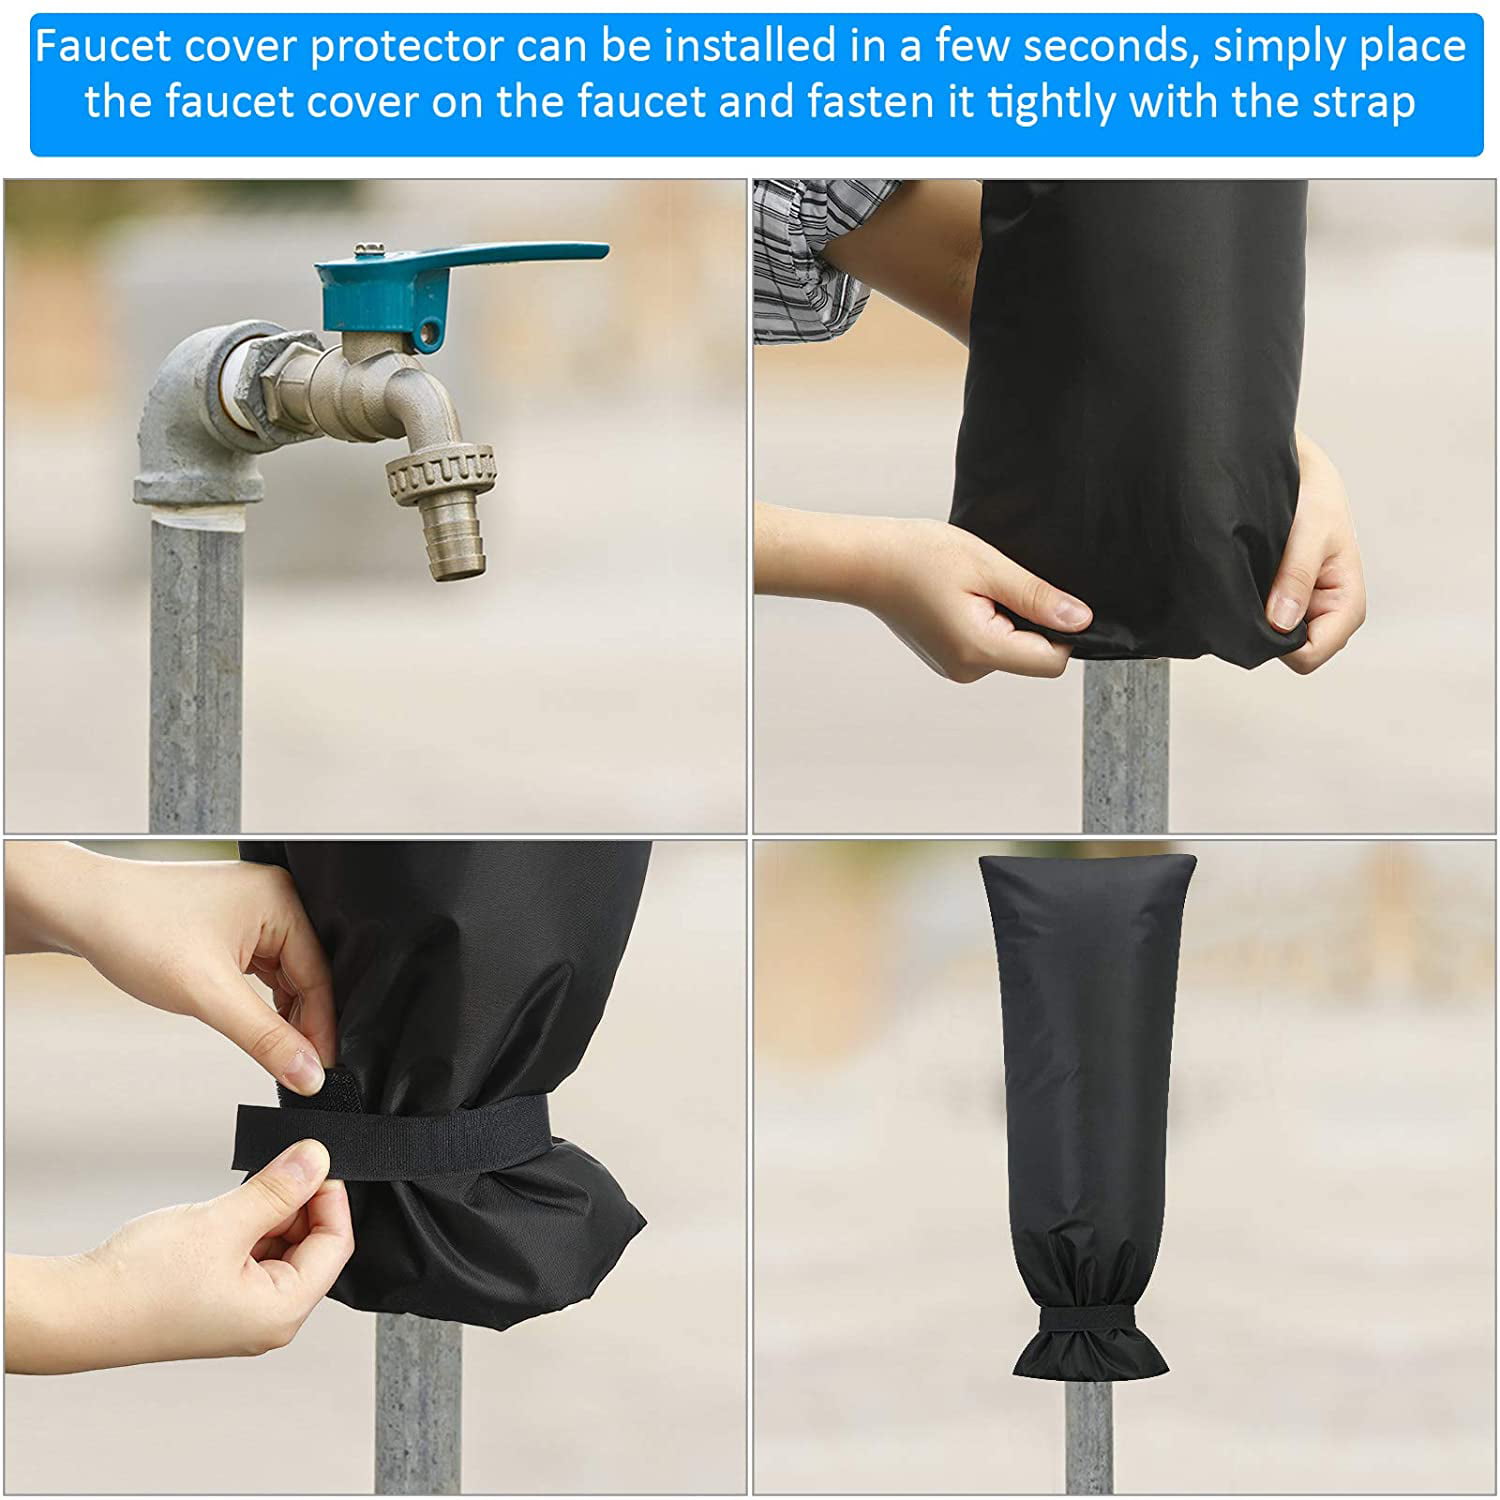 2 Packs Outdoor Faucet Covers for Winter Outside Long Faucet Protector Faucet 25 